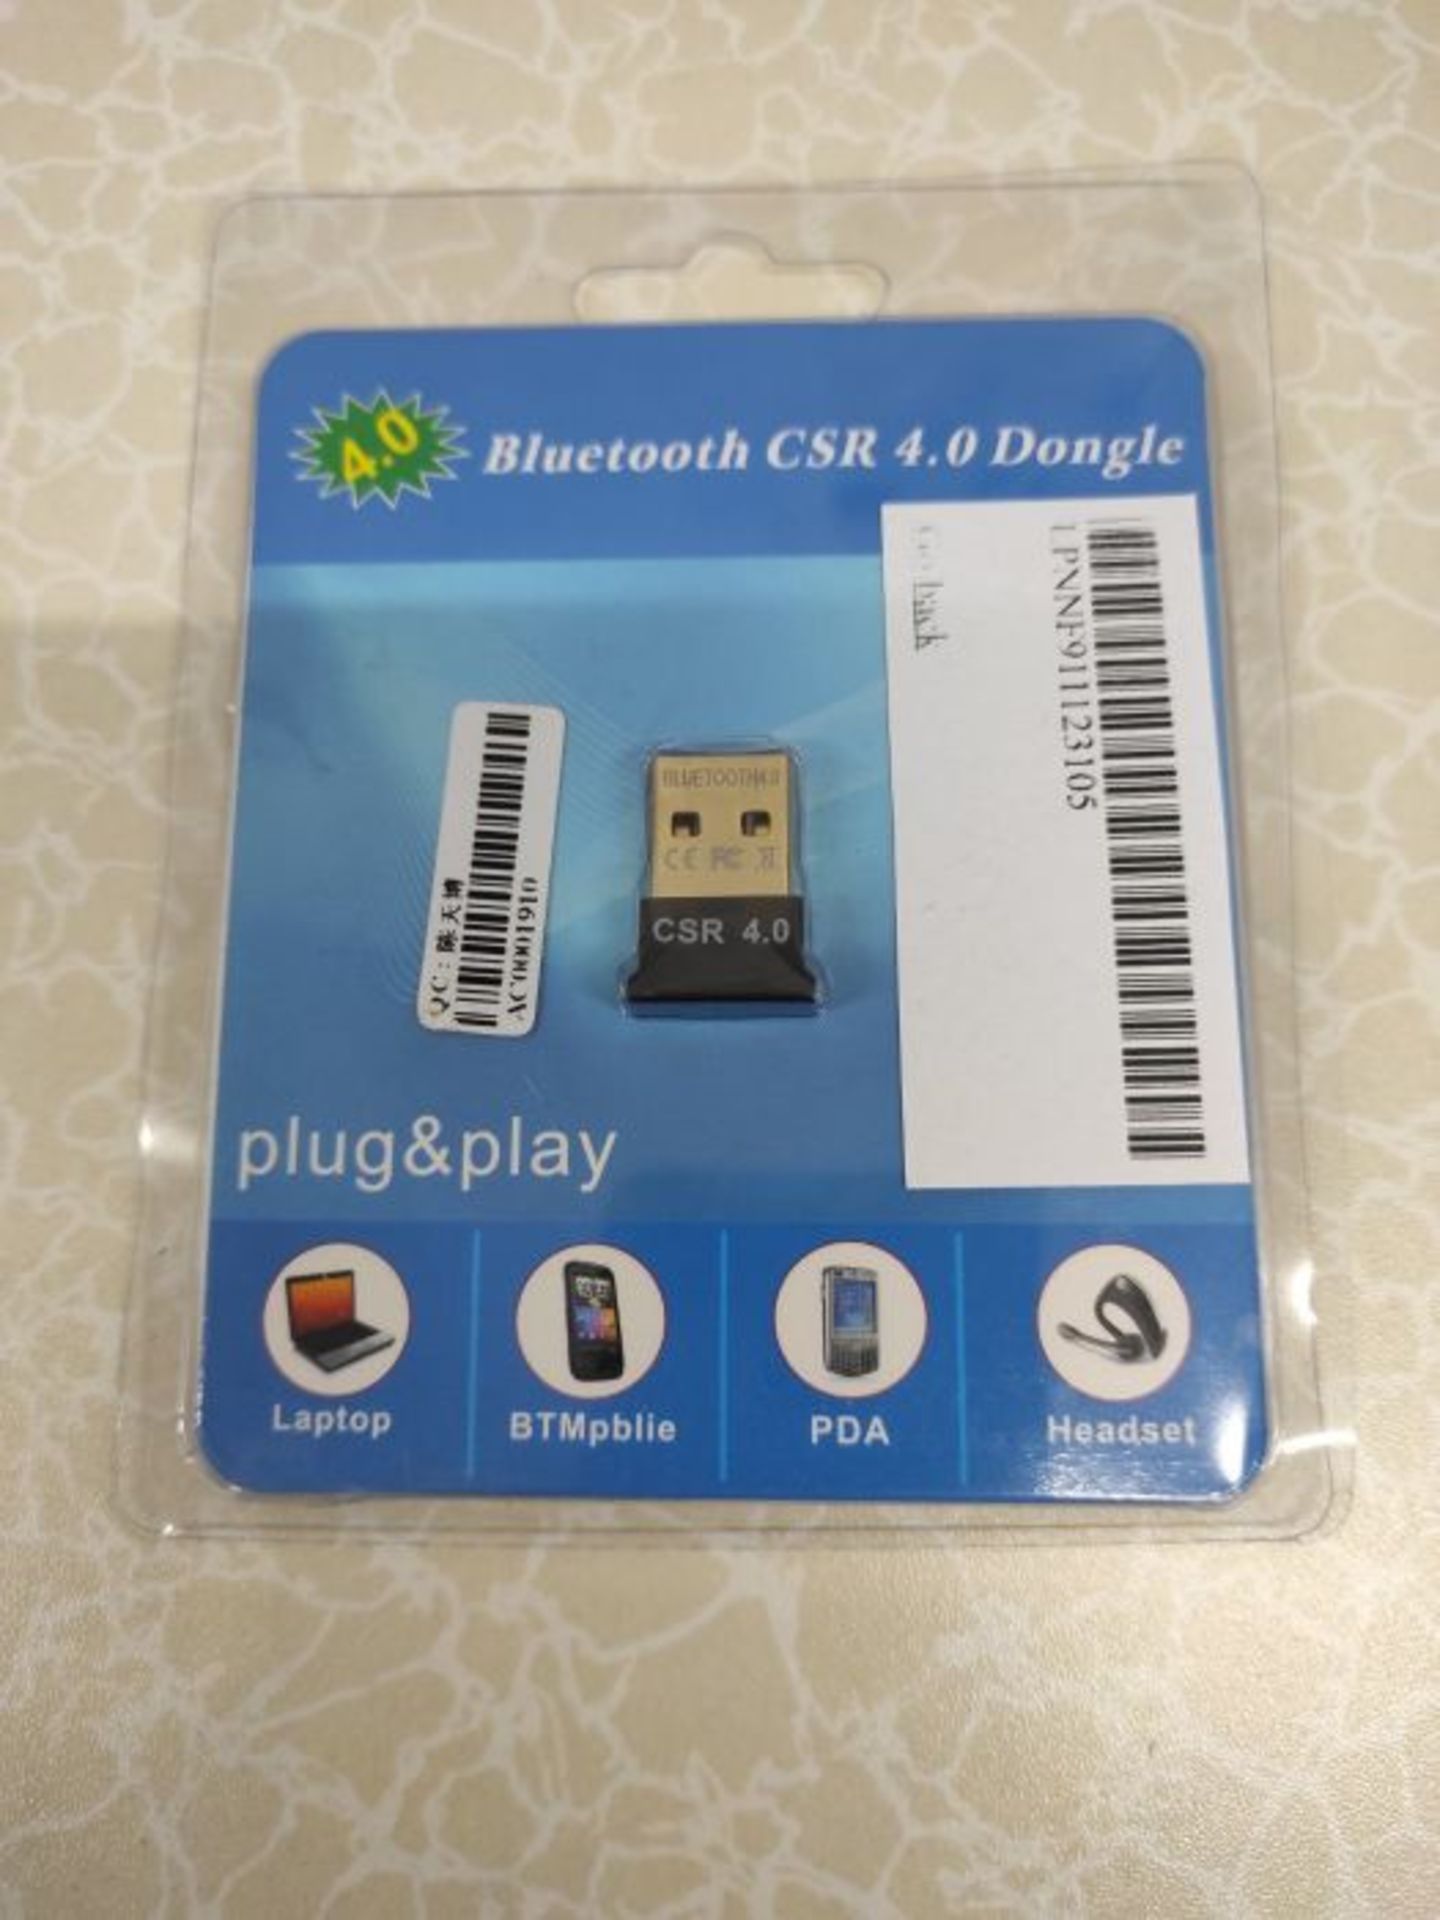 Bluetooth CSR 4.0 Dongle USB Adapter Plug and Play For For Windows 10 / 8.1 / 8 / 7 ¡ - Image 2 of 3